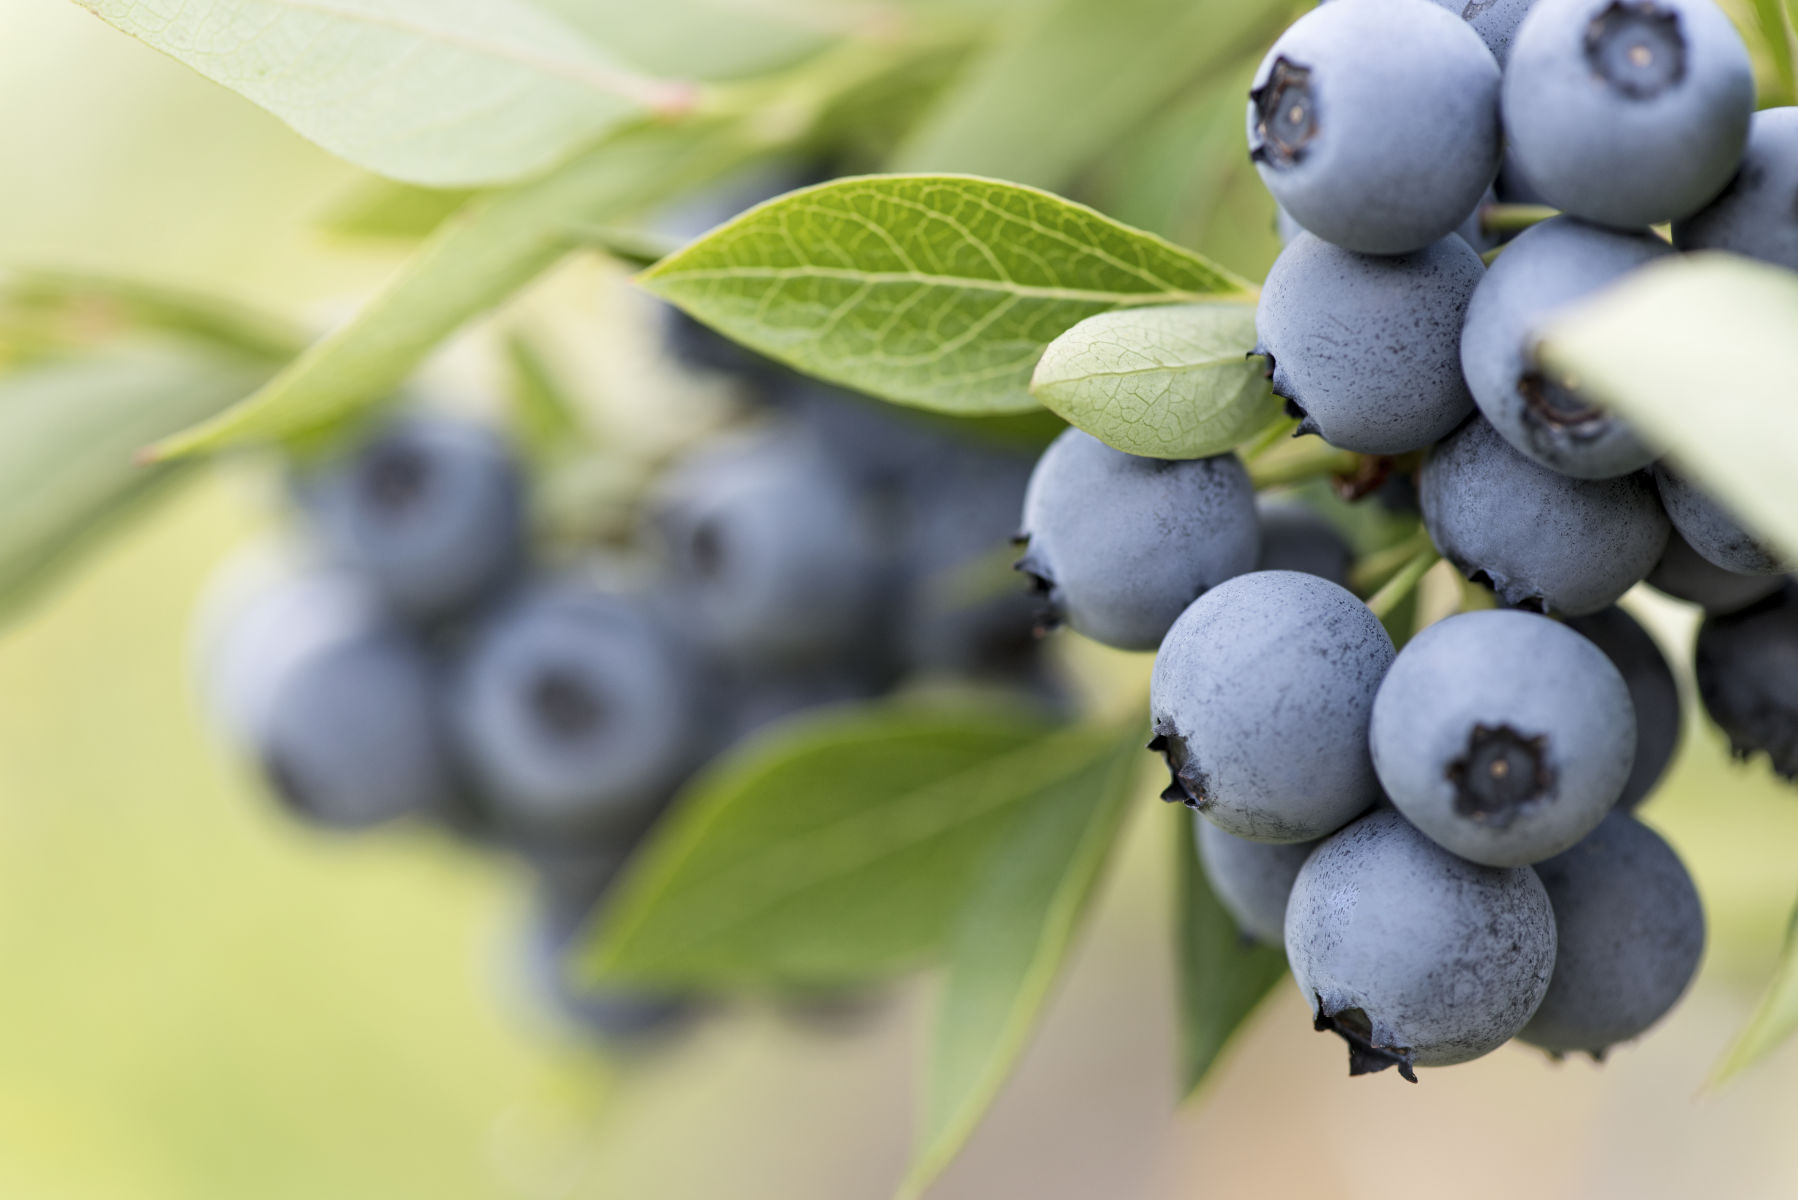 New Zealand joins blueberry genome initiative